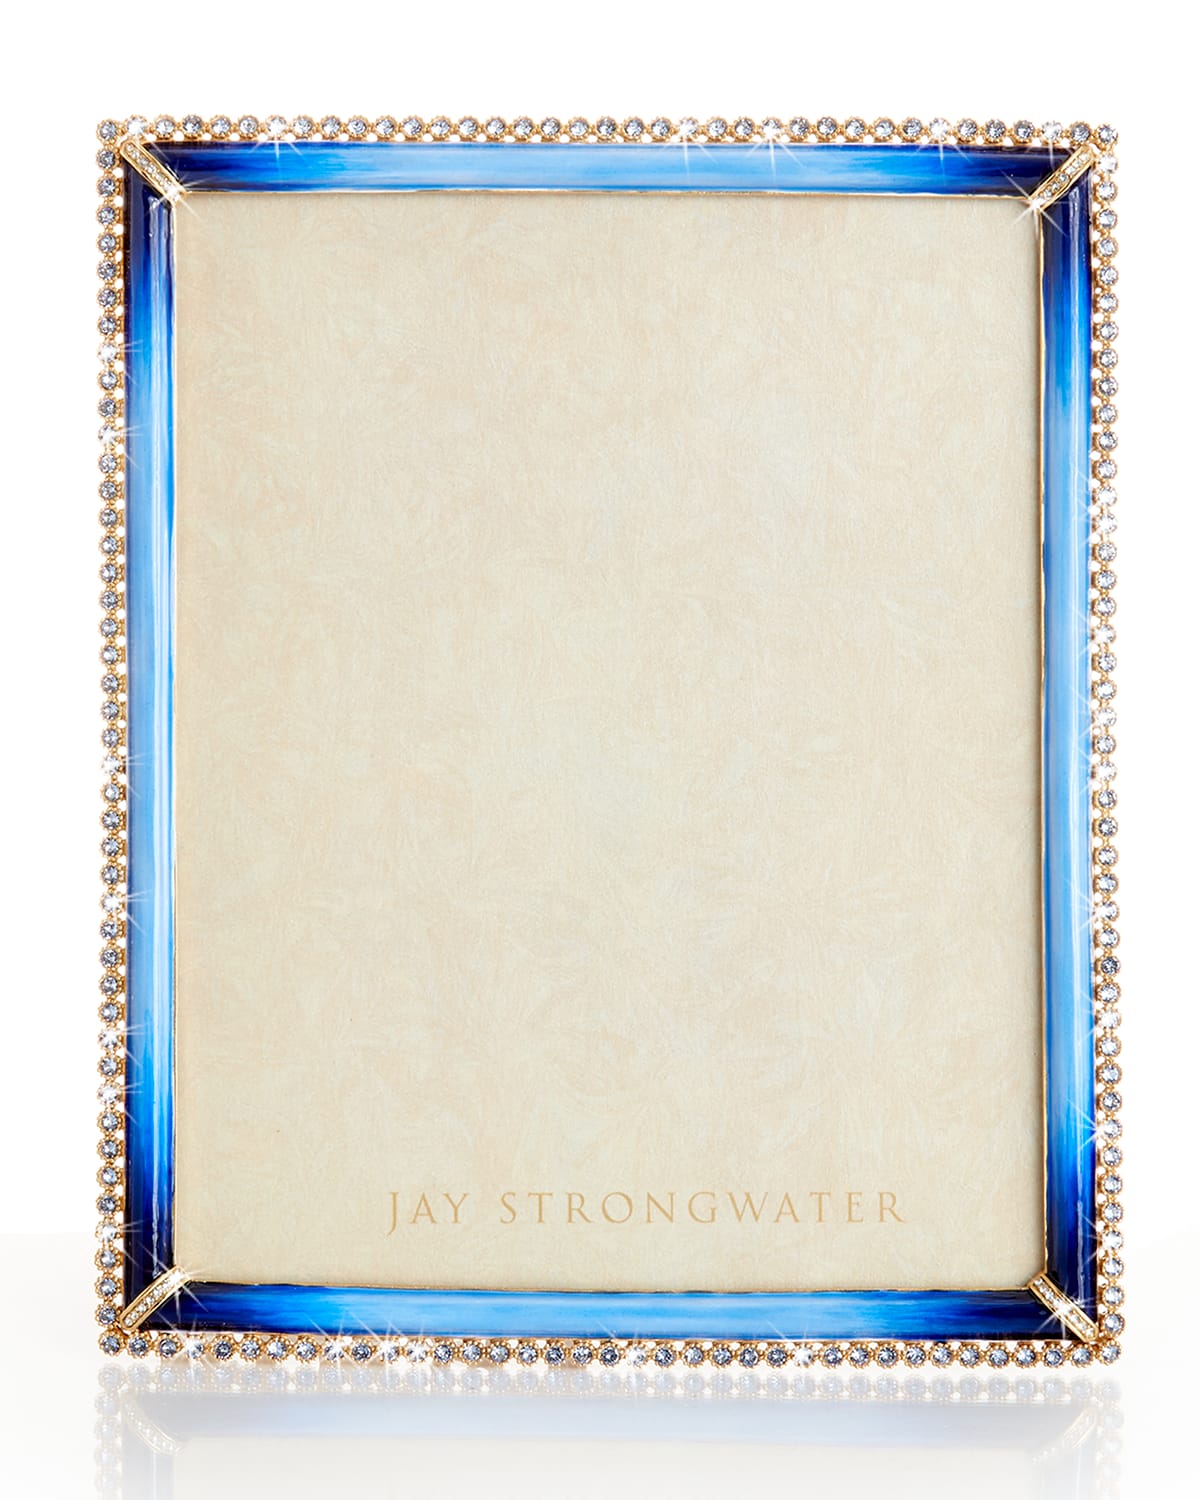 Jay Strongwater Stone Edge Frame, 8" X 10" In Blue